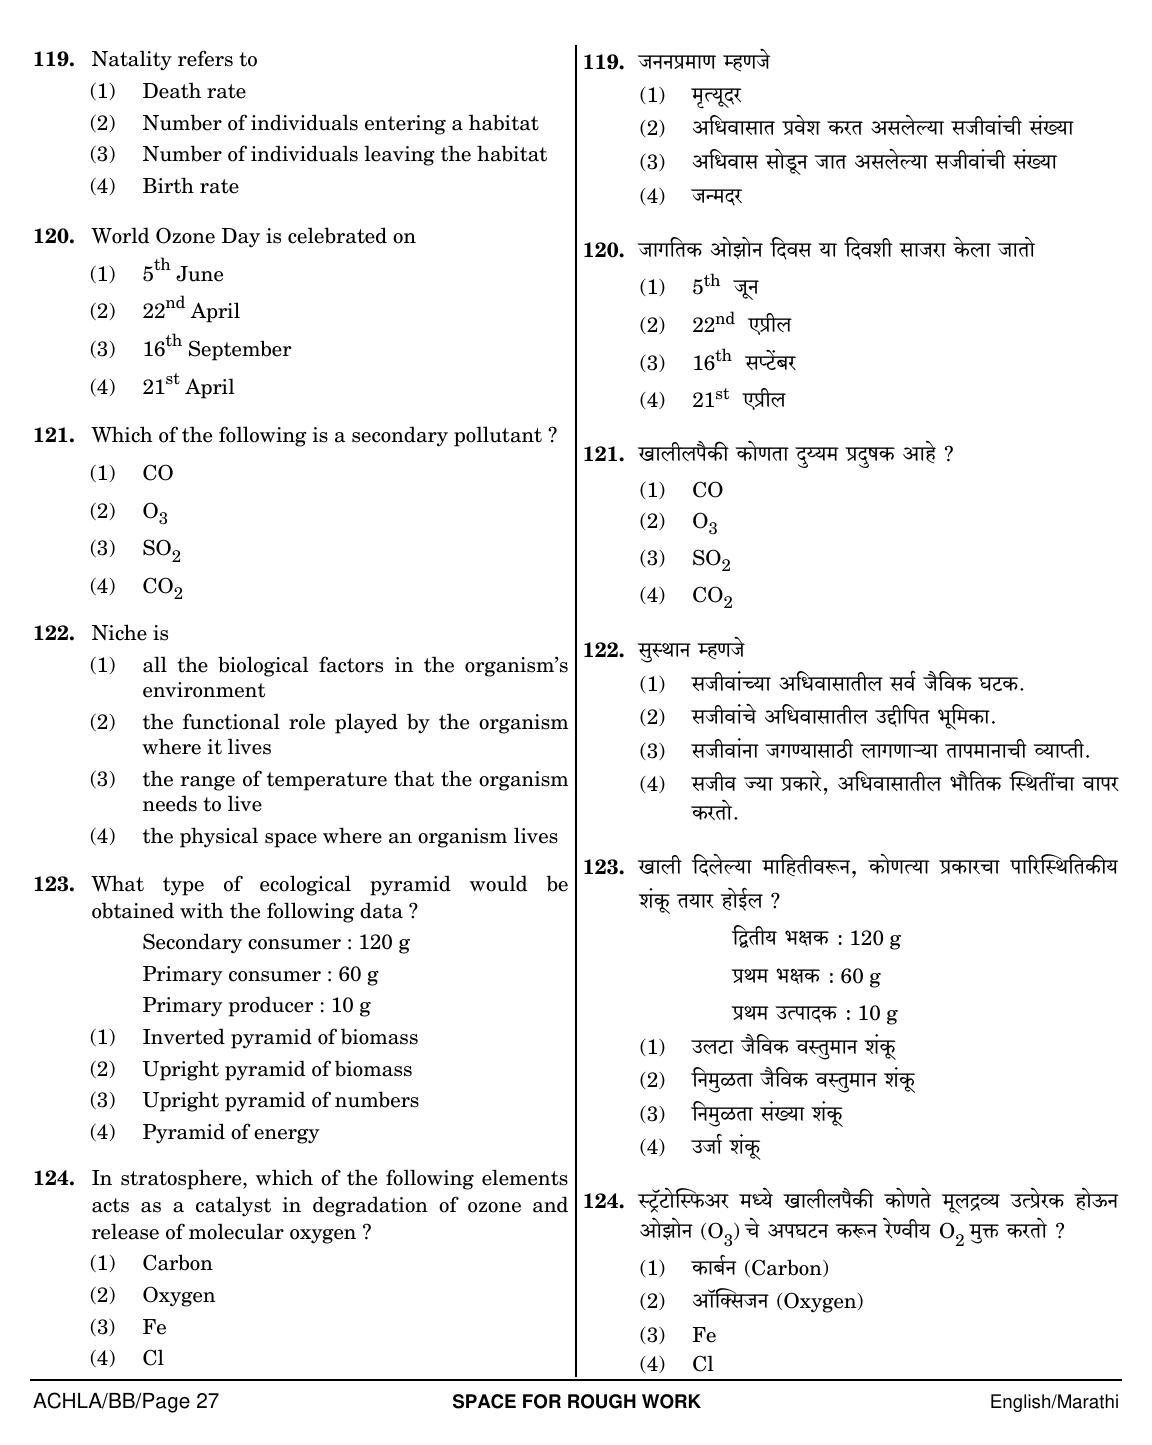 NEET Marathi BB 2018 Question Paper - Page 27